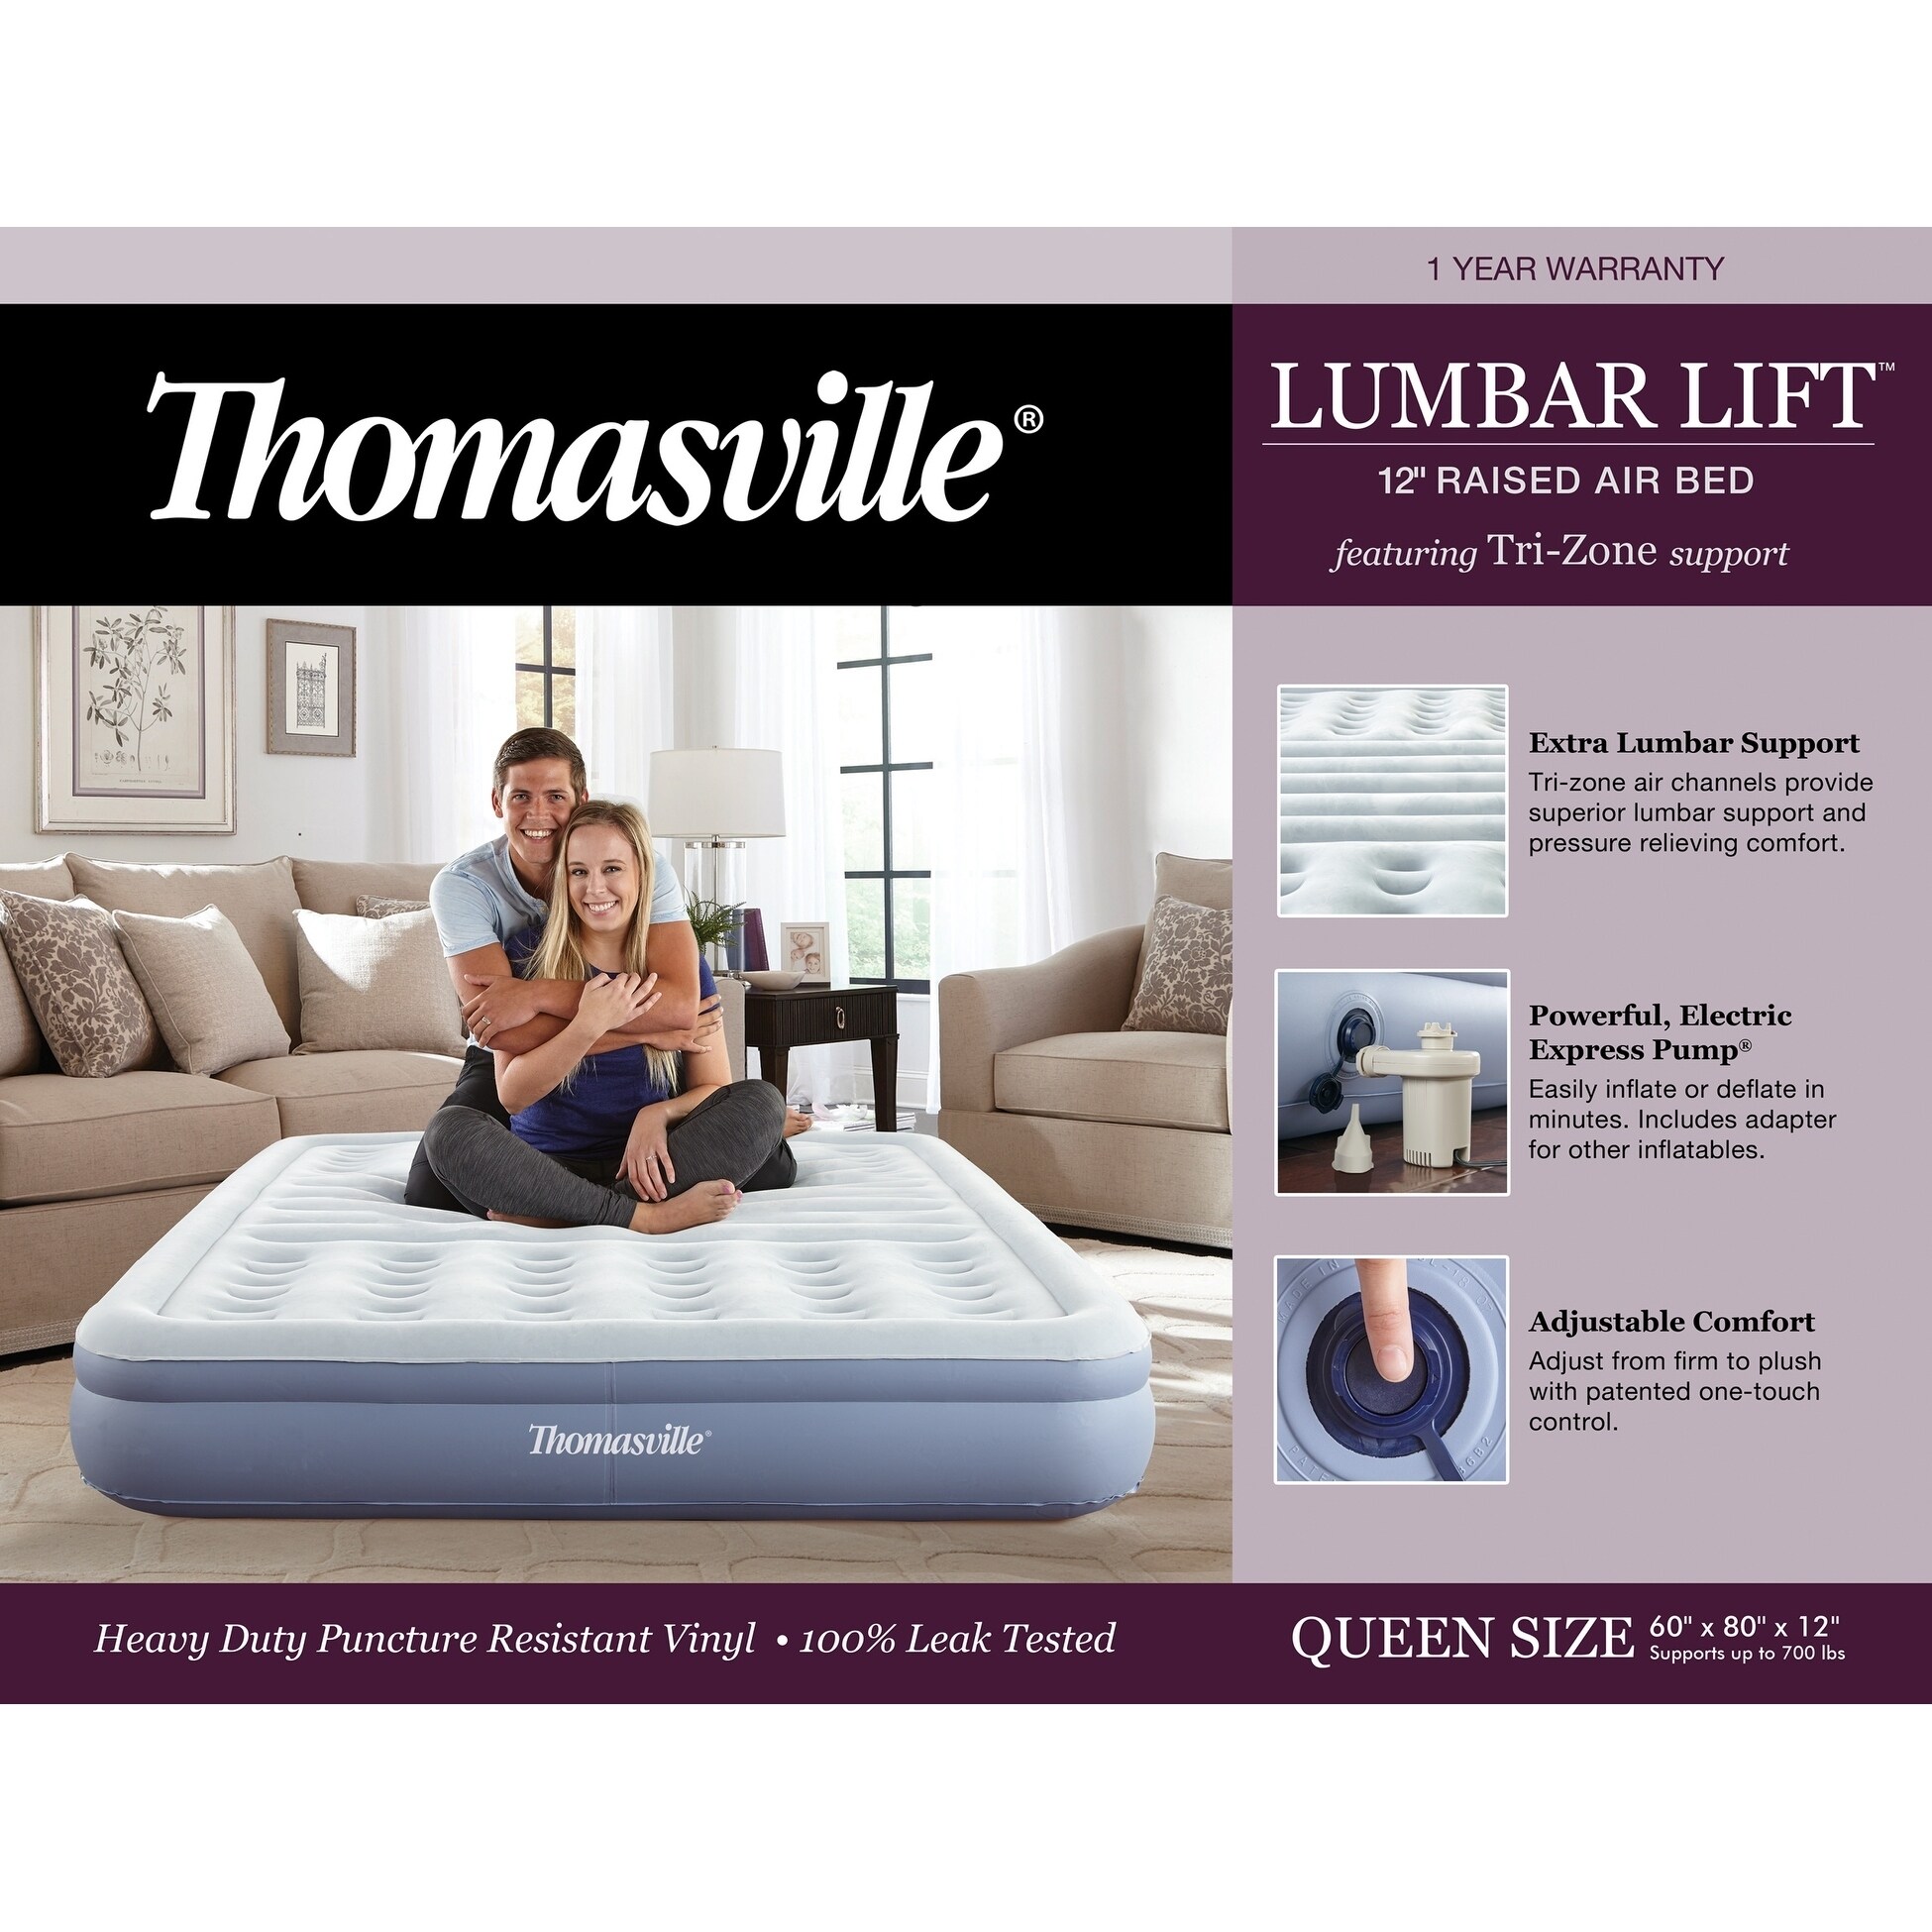 https://ak1.ostkcdn.com/images/products/27221130/Thomasville-12-inch-Queen-Size-Lumbar-Lift-Express-Tri-Zone-Support-Raised-Air-Bed-Mattress-with-Express-Pump-f45af18a-2ebc-4e32-9c1b-9bcdee945925.jpg